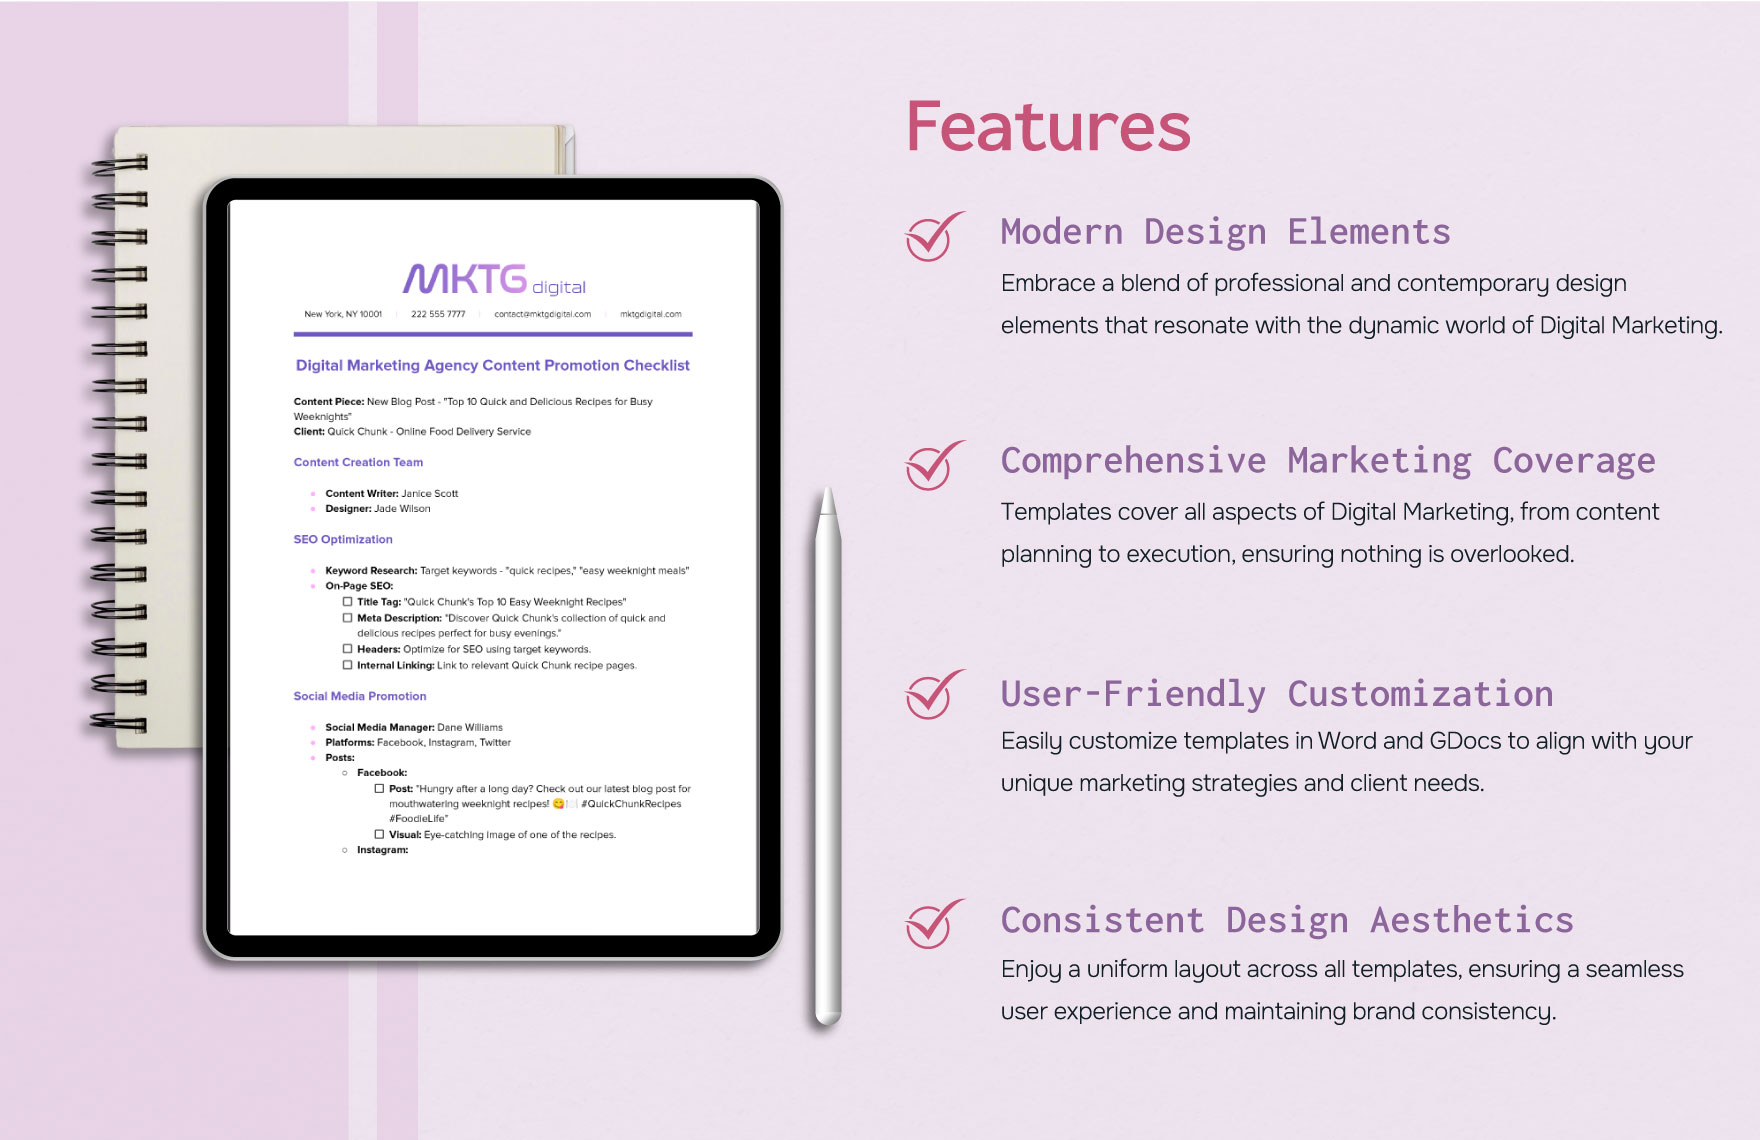 Digital Marketing Agency Content Promotion Checklist Template